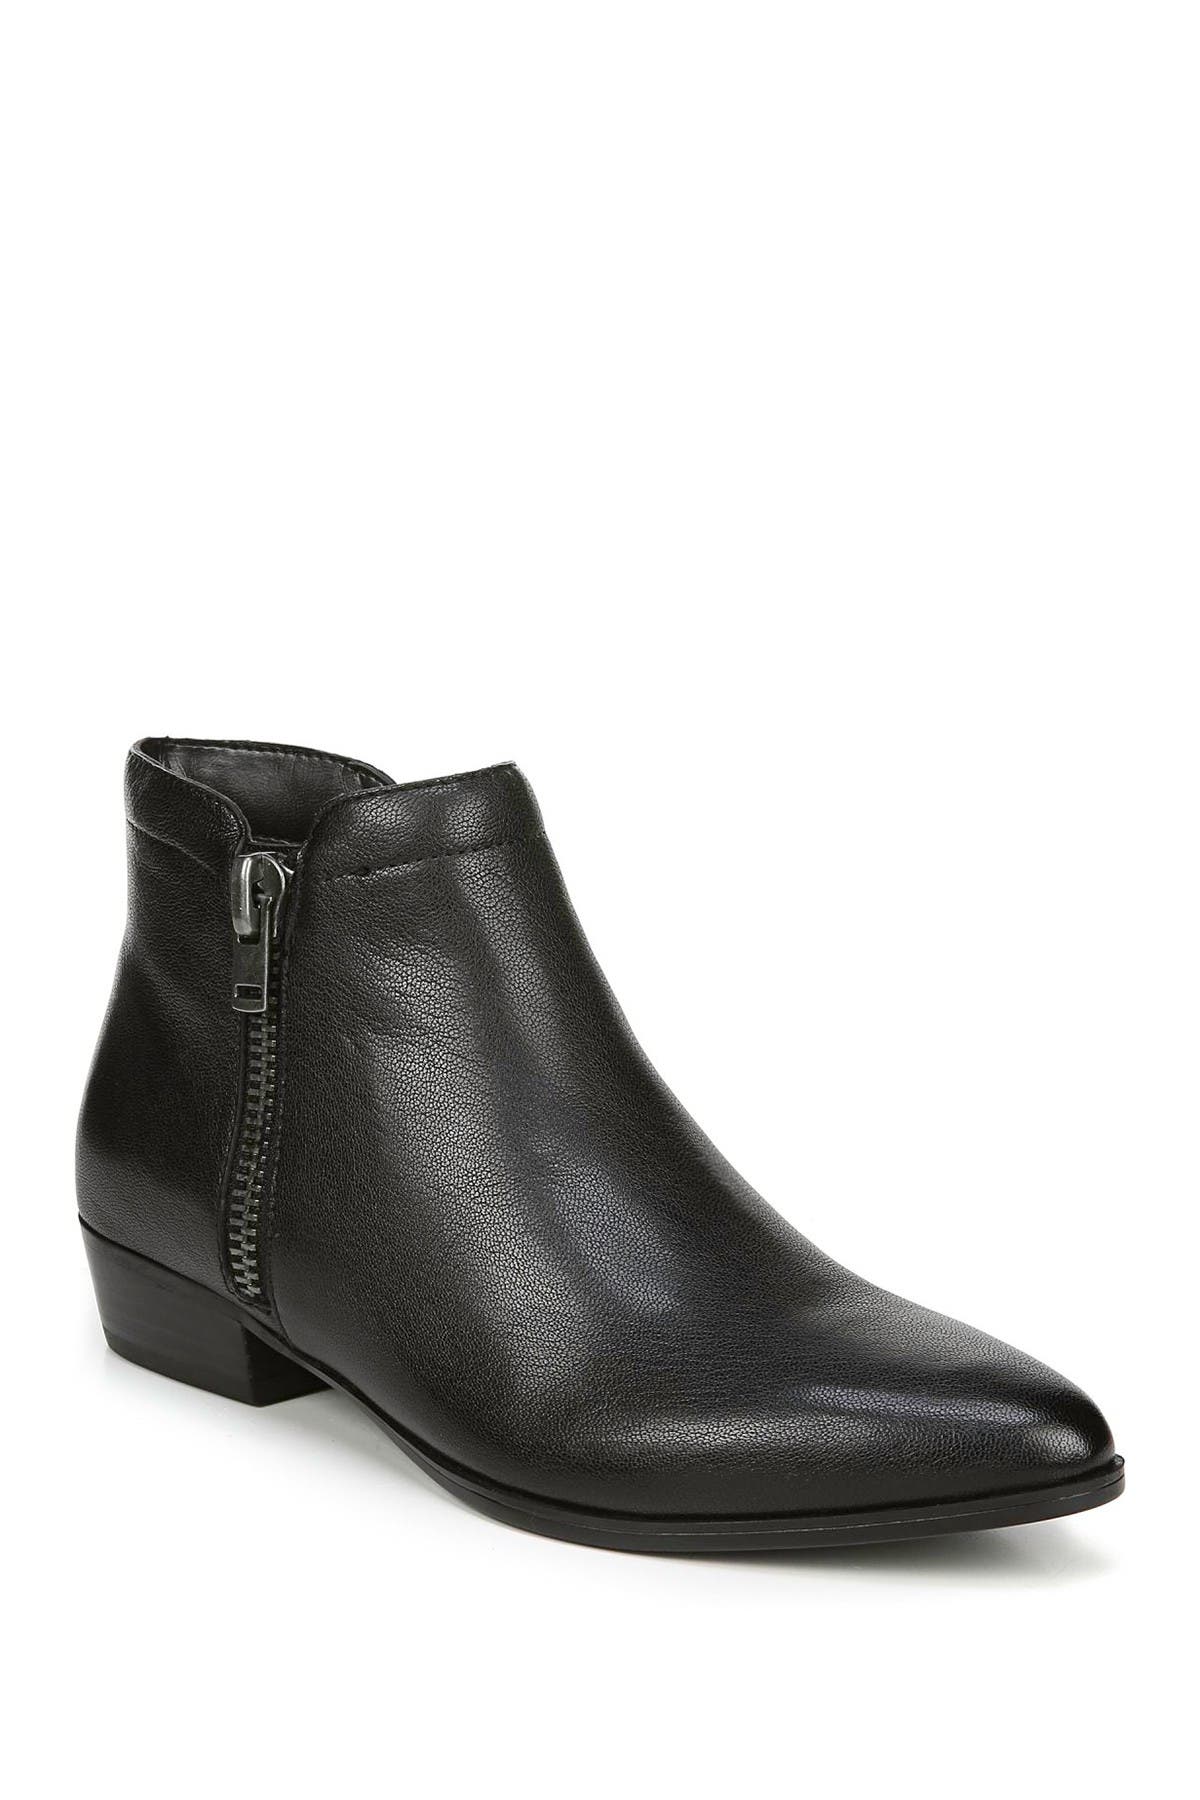 Naturalizer | Claire Leather Ankle Boot 